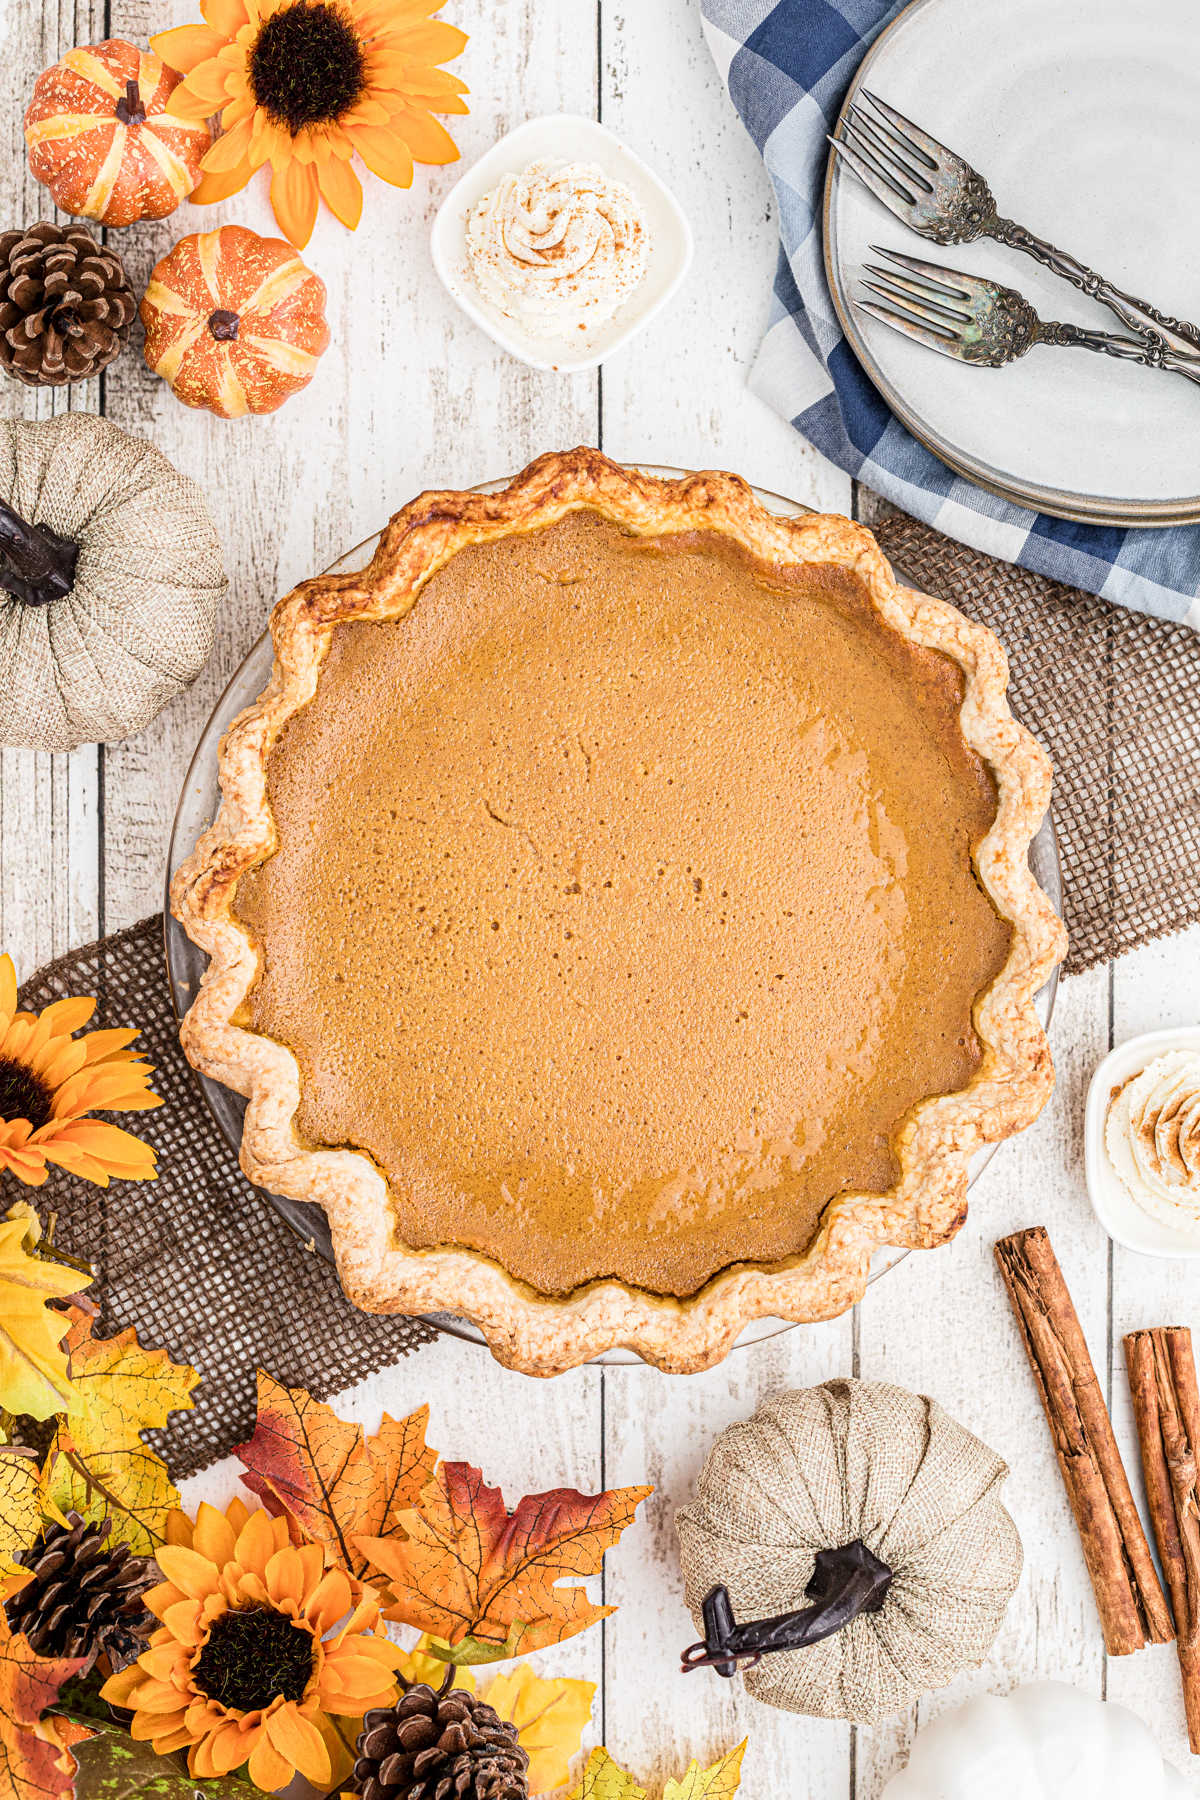 A beautiful Amish pumpkin pie on a table decorated with fall decorations